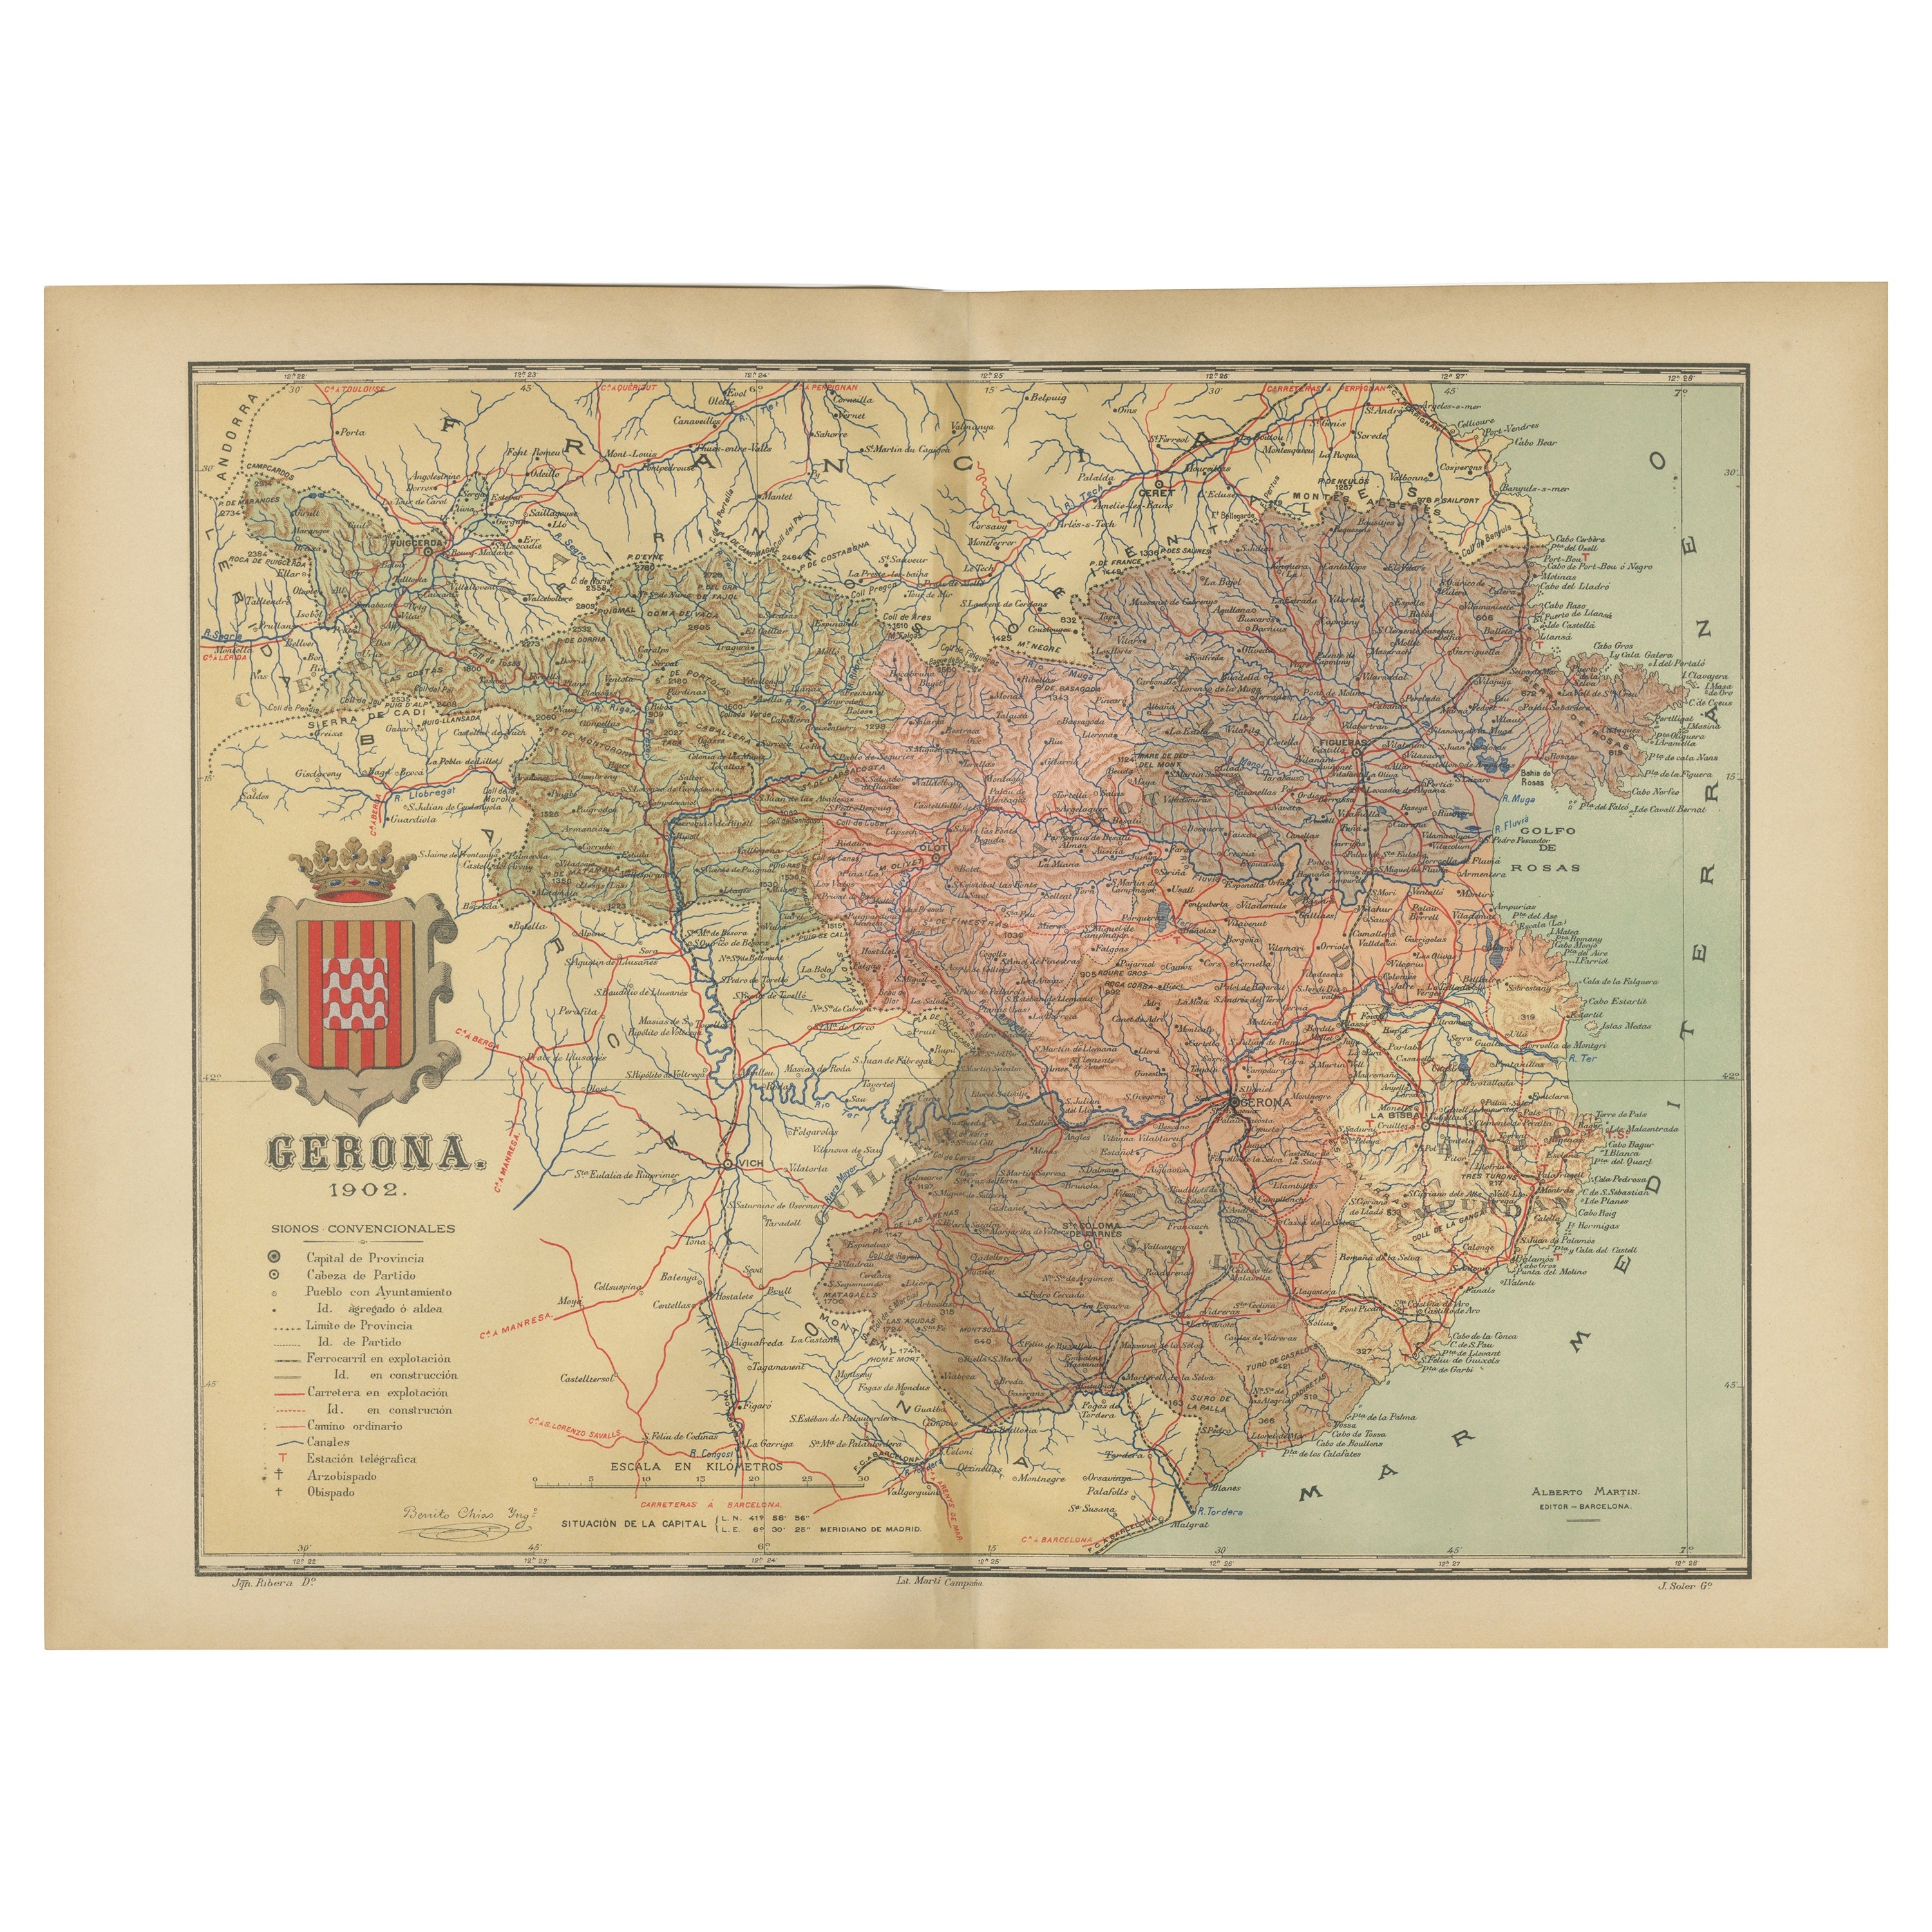 Girona 1902: Geographic and Infrastructural Map of Catalonia’s Northern Province For Sale